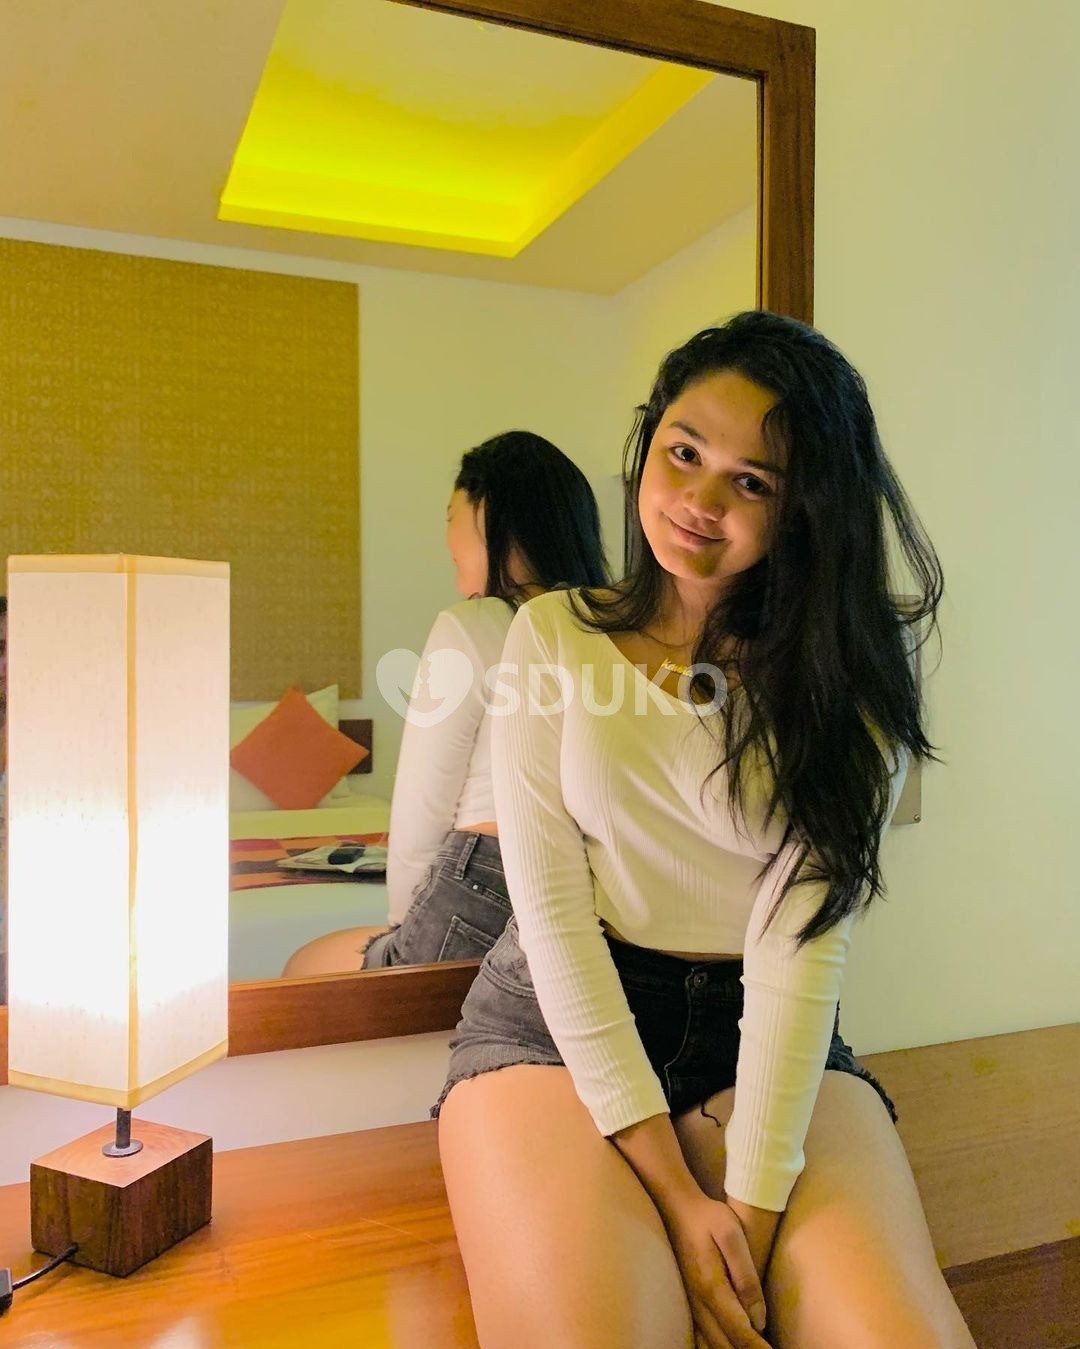 BTM LAYOUT BANGALORE 👉 Low price 100% genuinely 🔝 sexy vip 👥call girl service available 💯% safe and secure 2